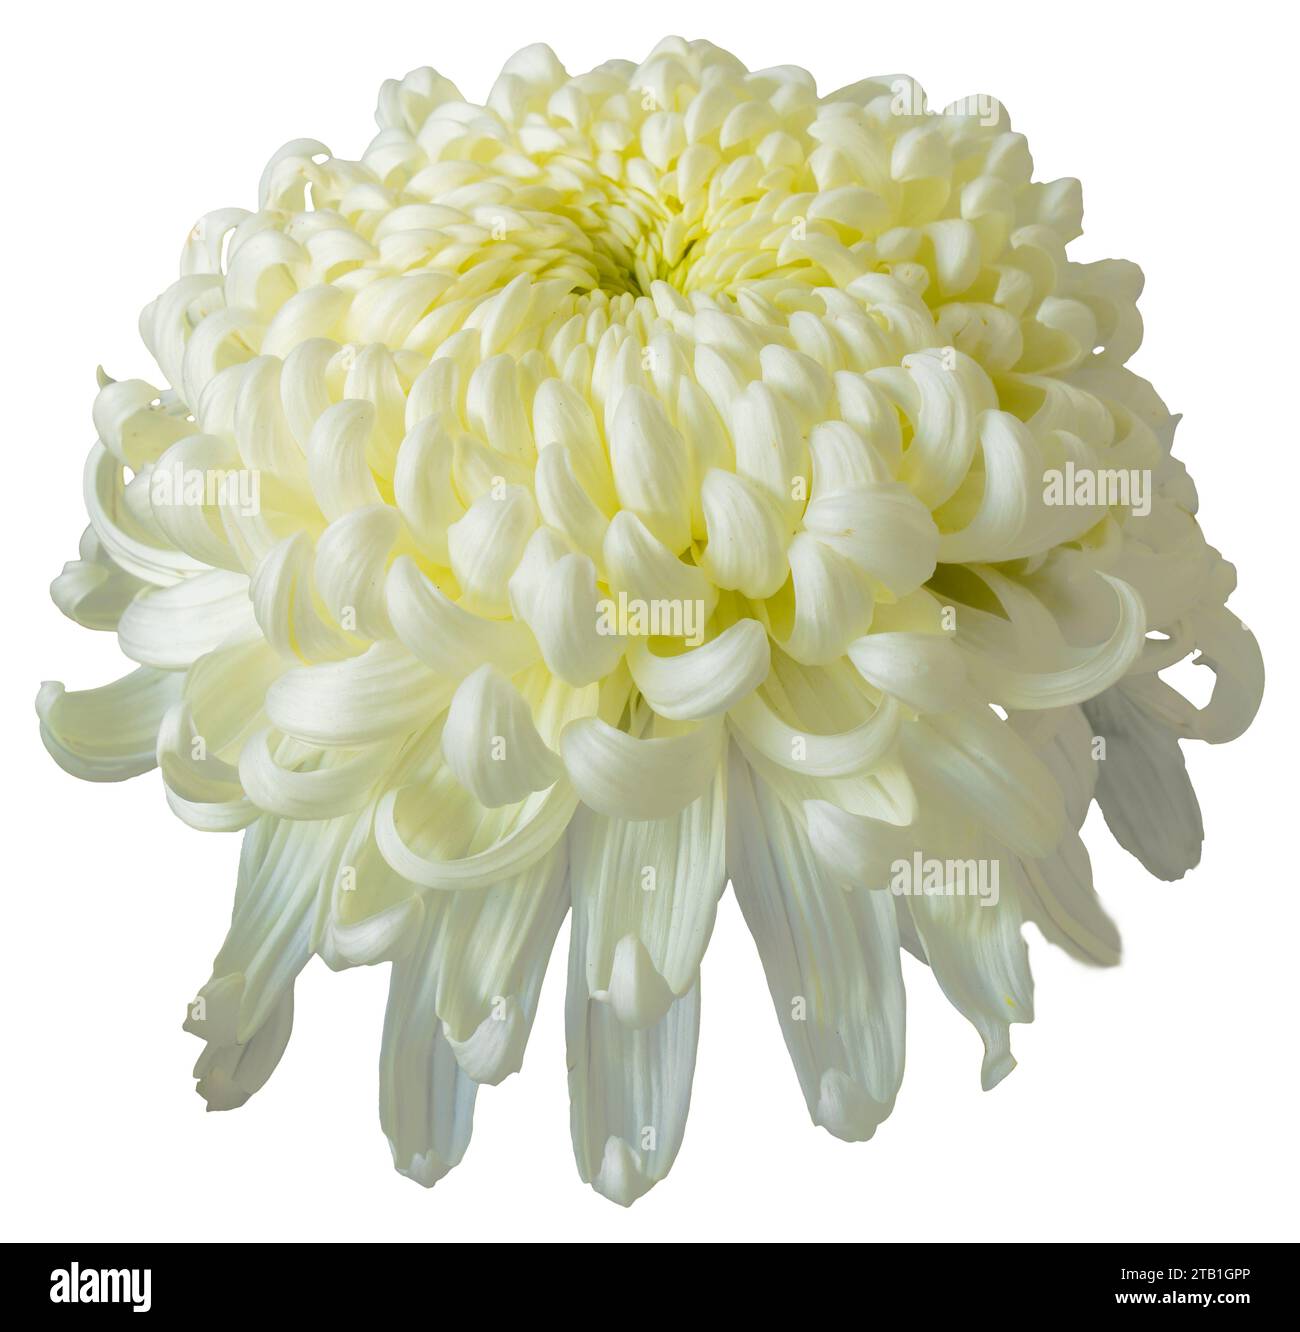 One white chrysanthemum flower isolated on white background. Isolate a large flower with clipping path. Taipei Chrysanthemum Exhibition. Stock Photo